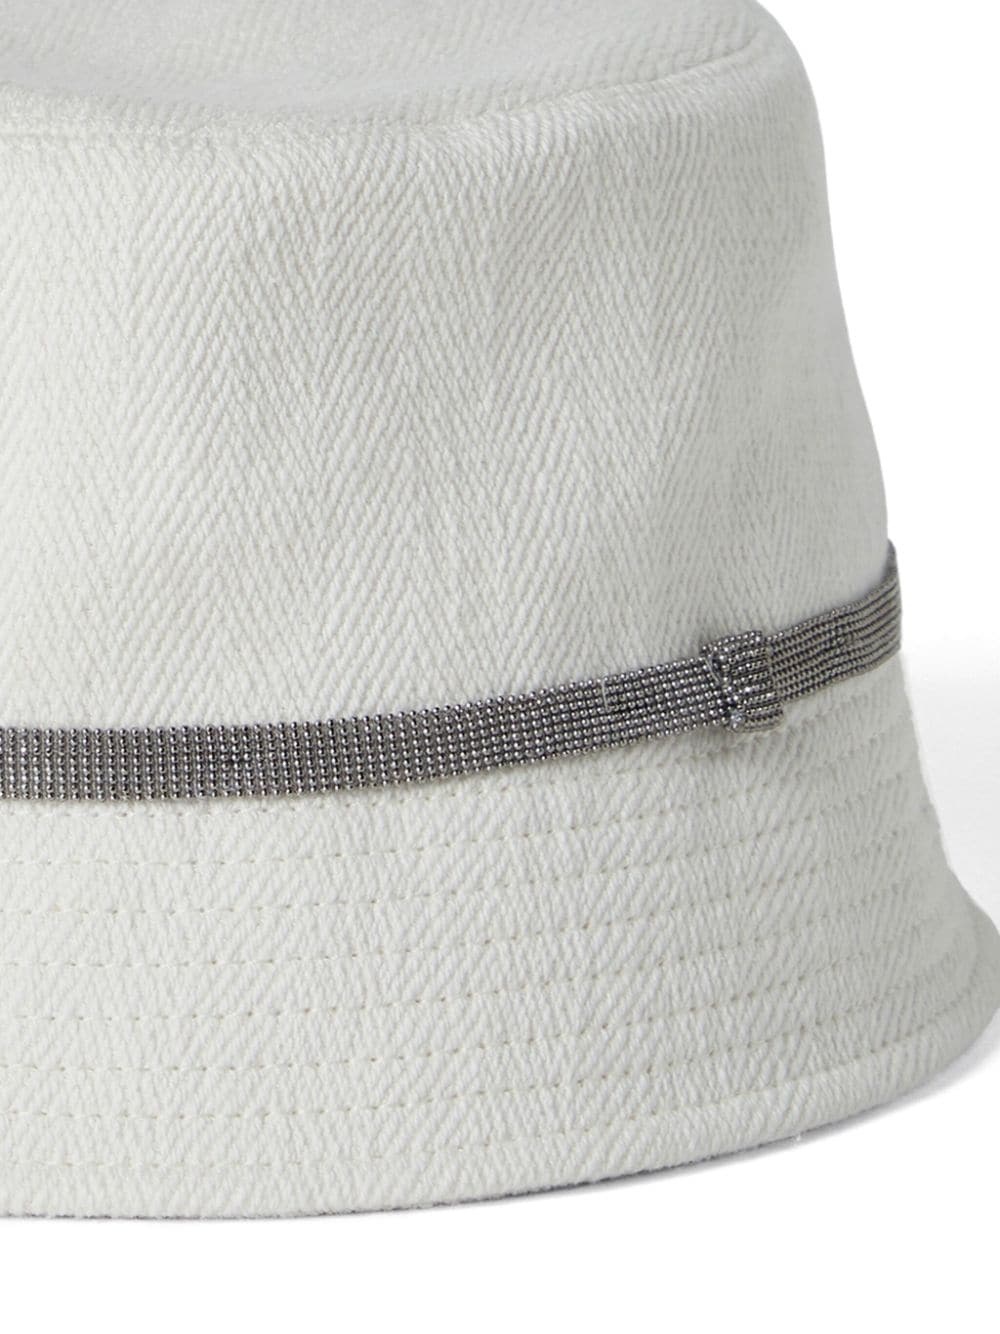 Linen and cotton bucket hat with shiny details - 3